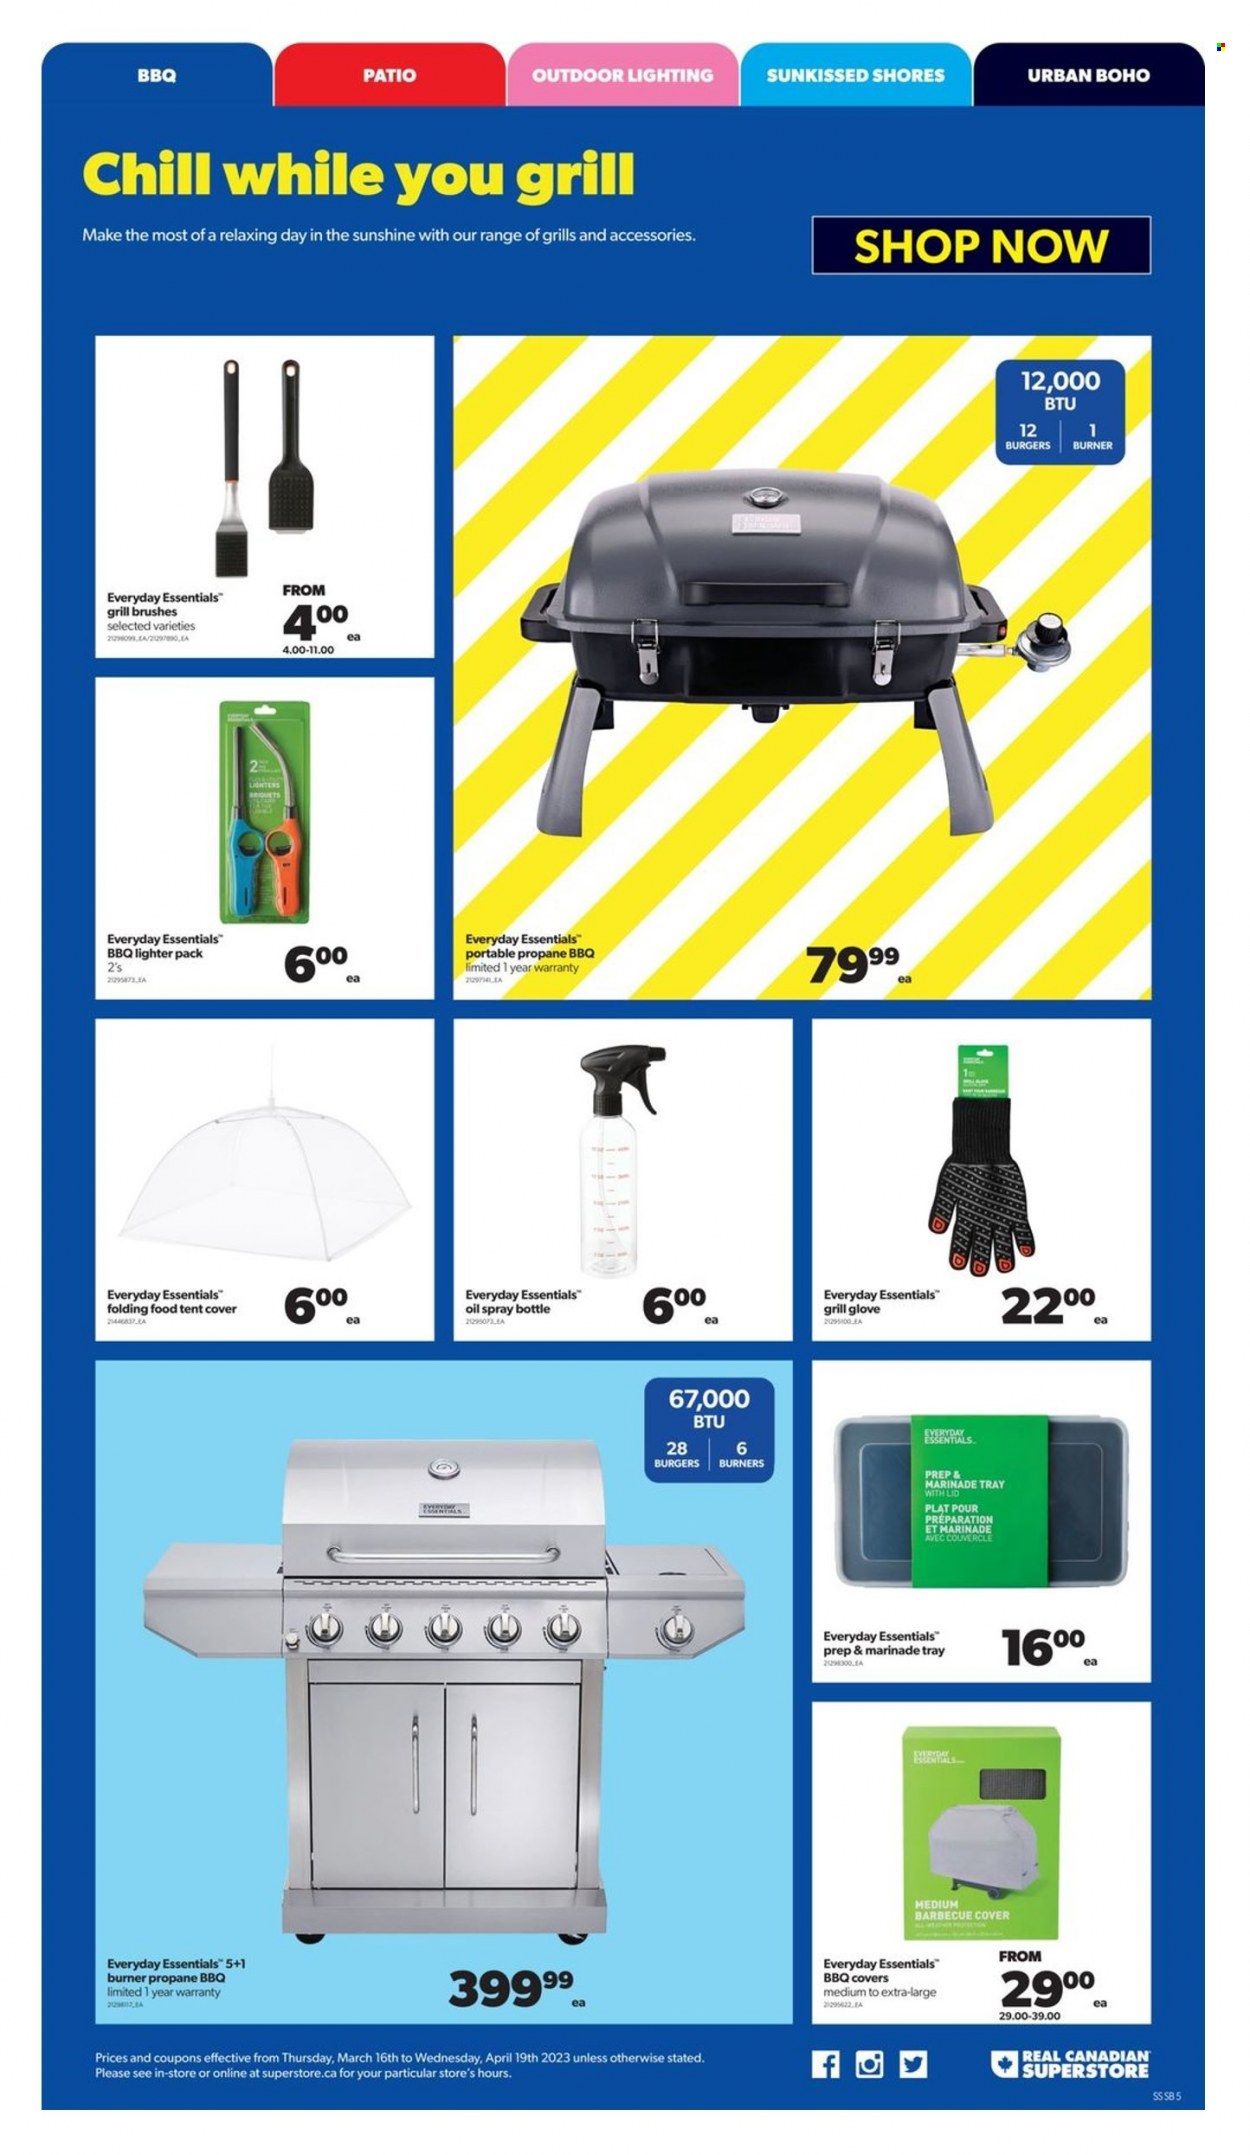 Real Canadian Superstore Flyer - March 16, 2023 - April 19, 2023 - Sales products - hamburger, bbq, Sunshine, marinade, oil, gloves, tray, Patio, lighting, grill, briquettes. Page 5.